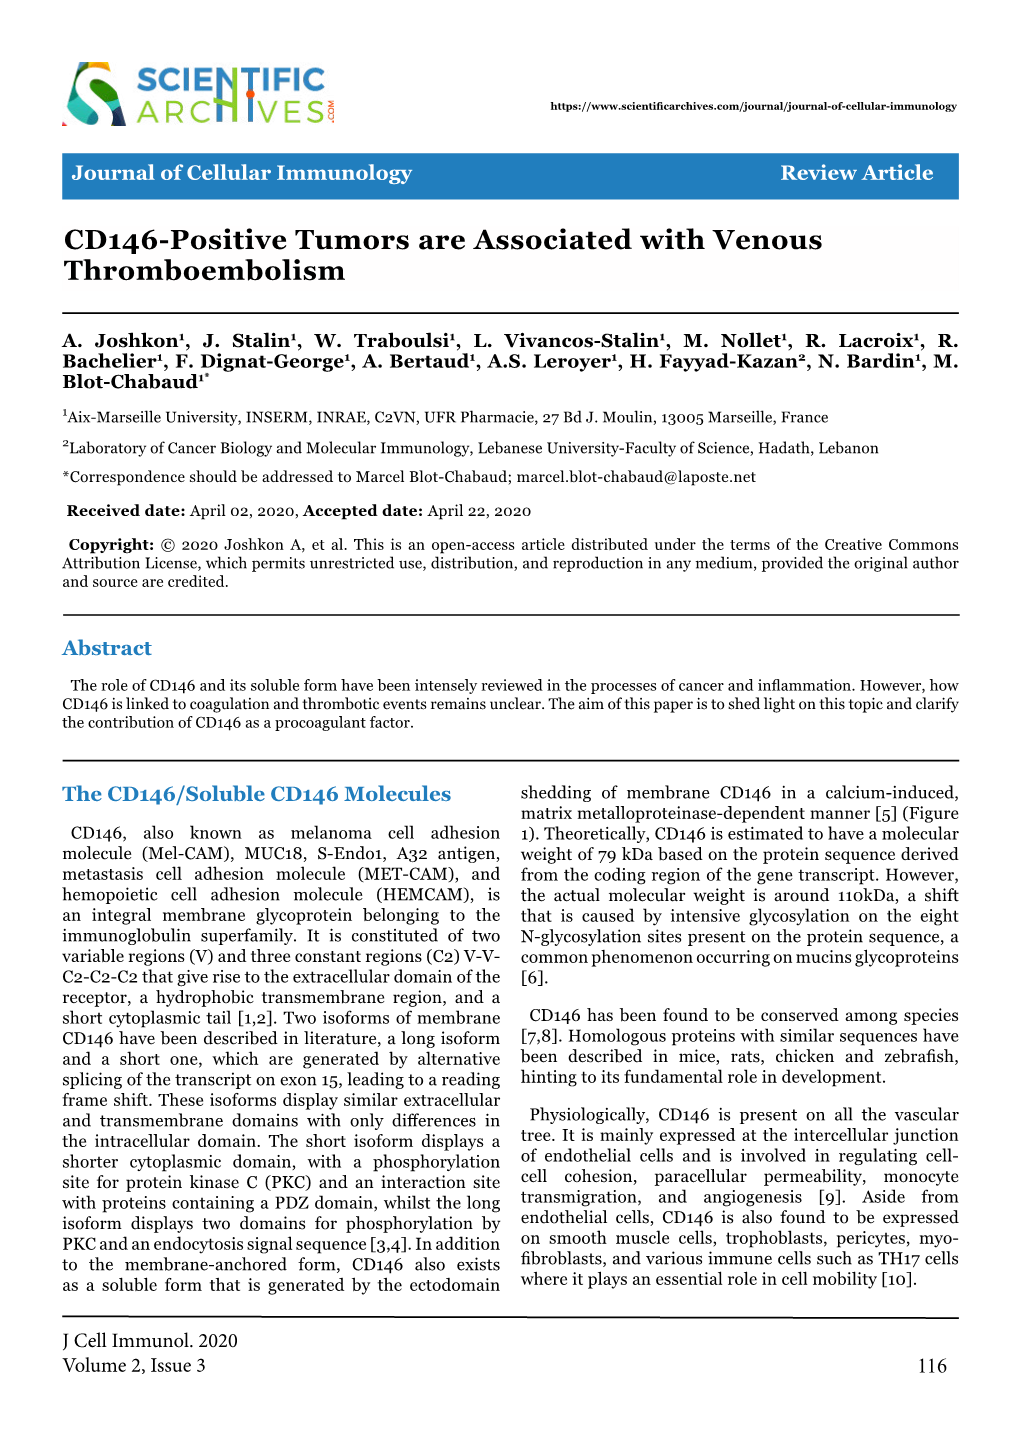 CD146-Positive Tumors Are Associated with Venous Thromboembolism